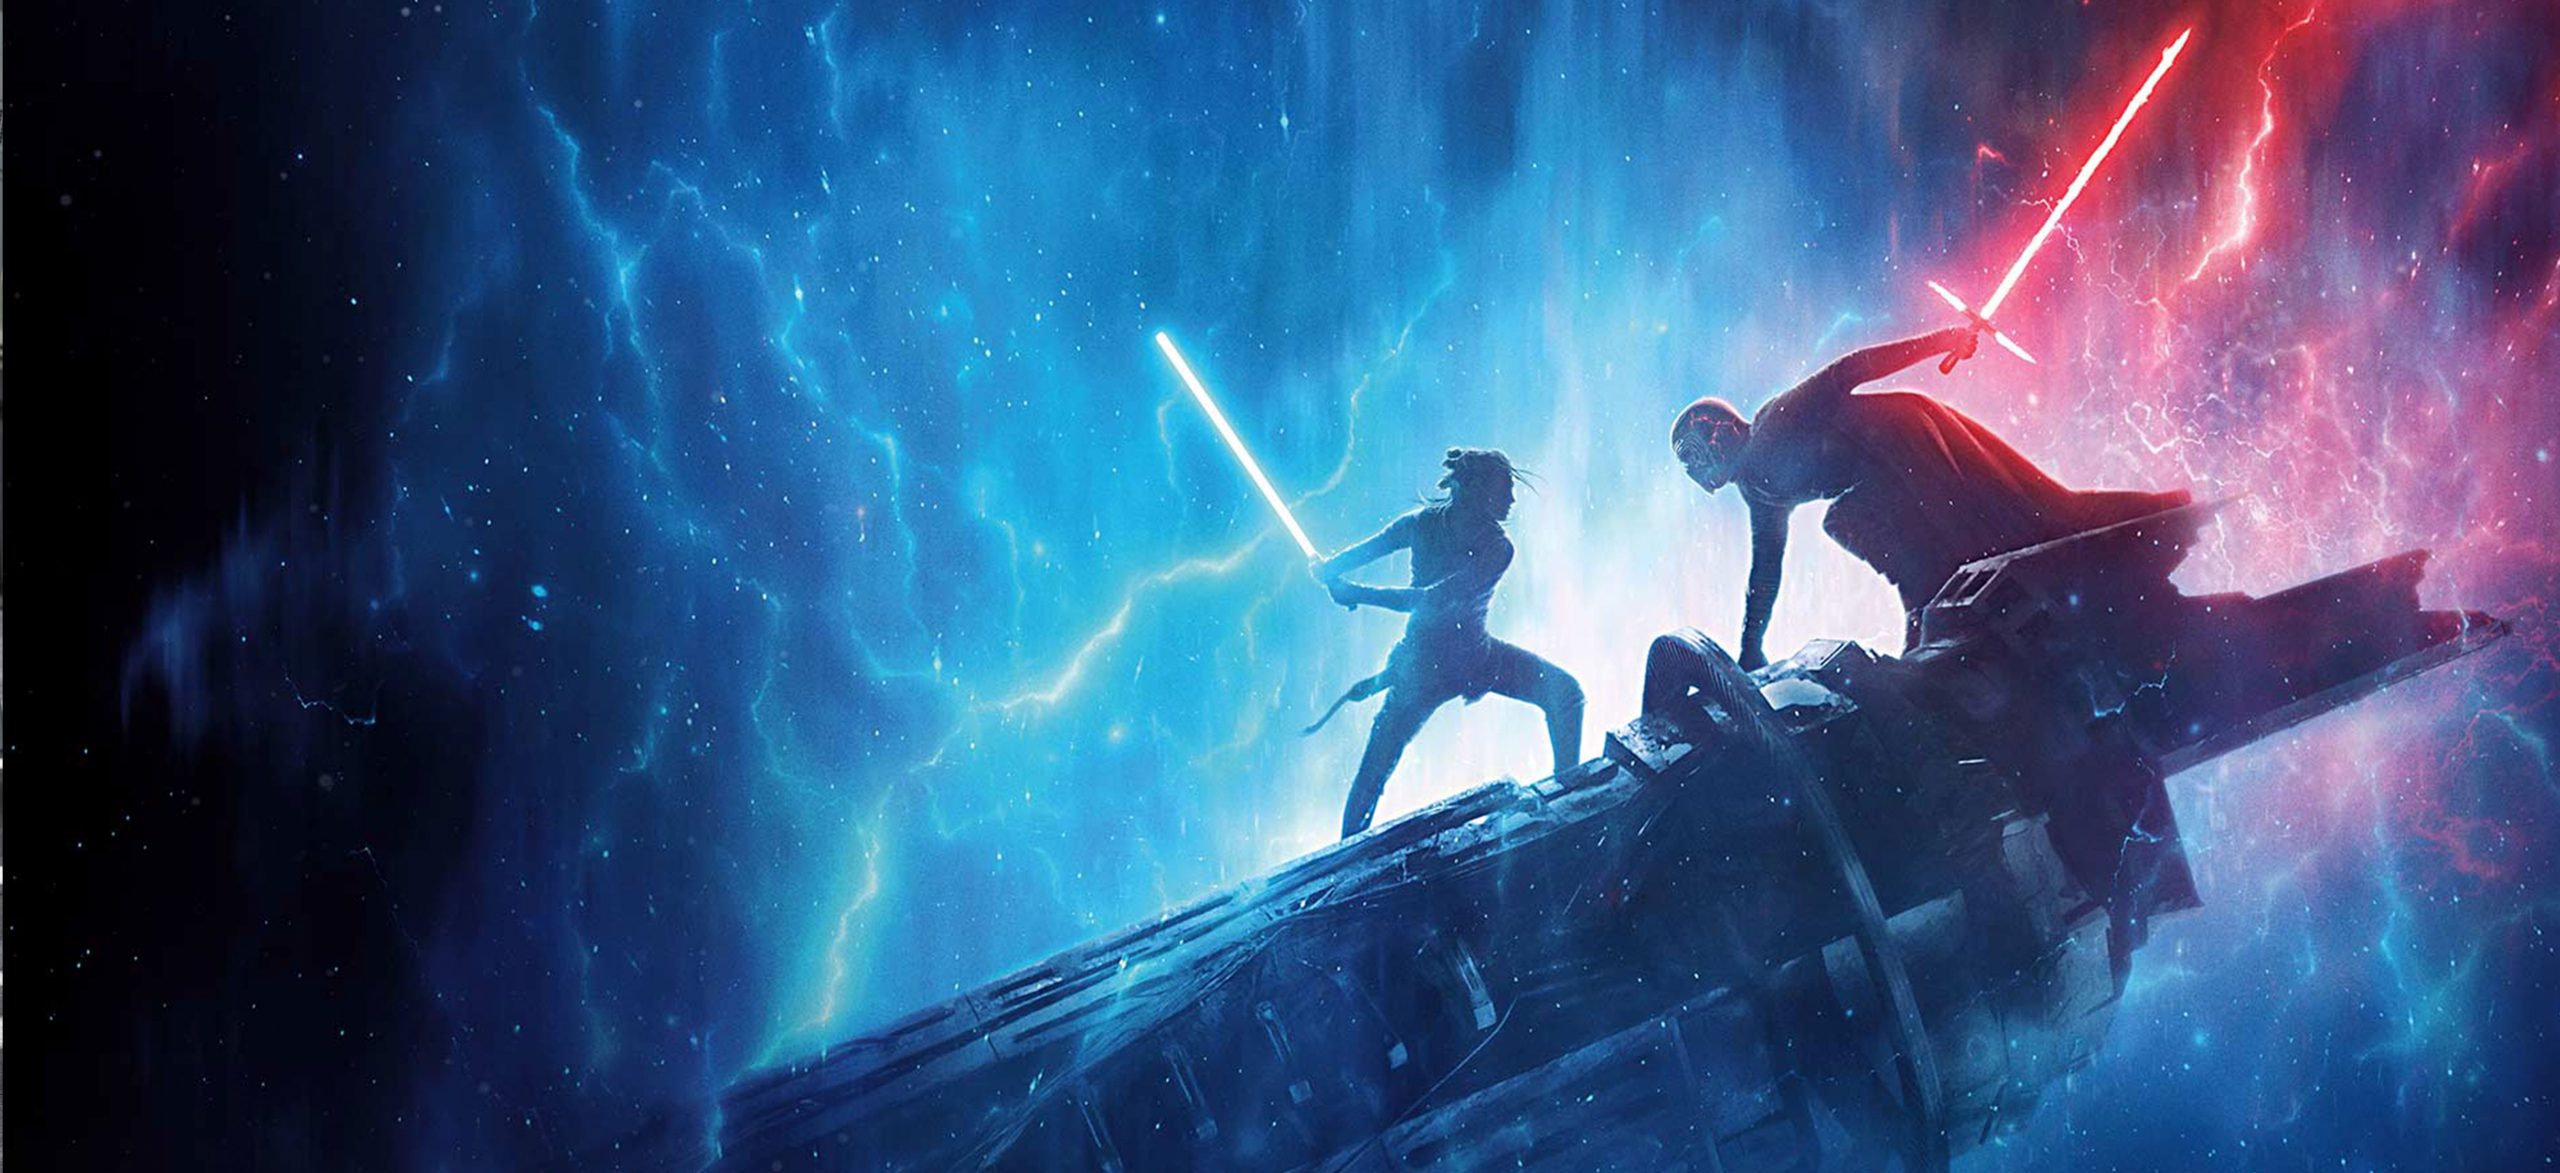 Background image for Movies On The Lawn: Star Wars: The Rise of Skywalker